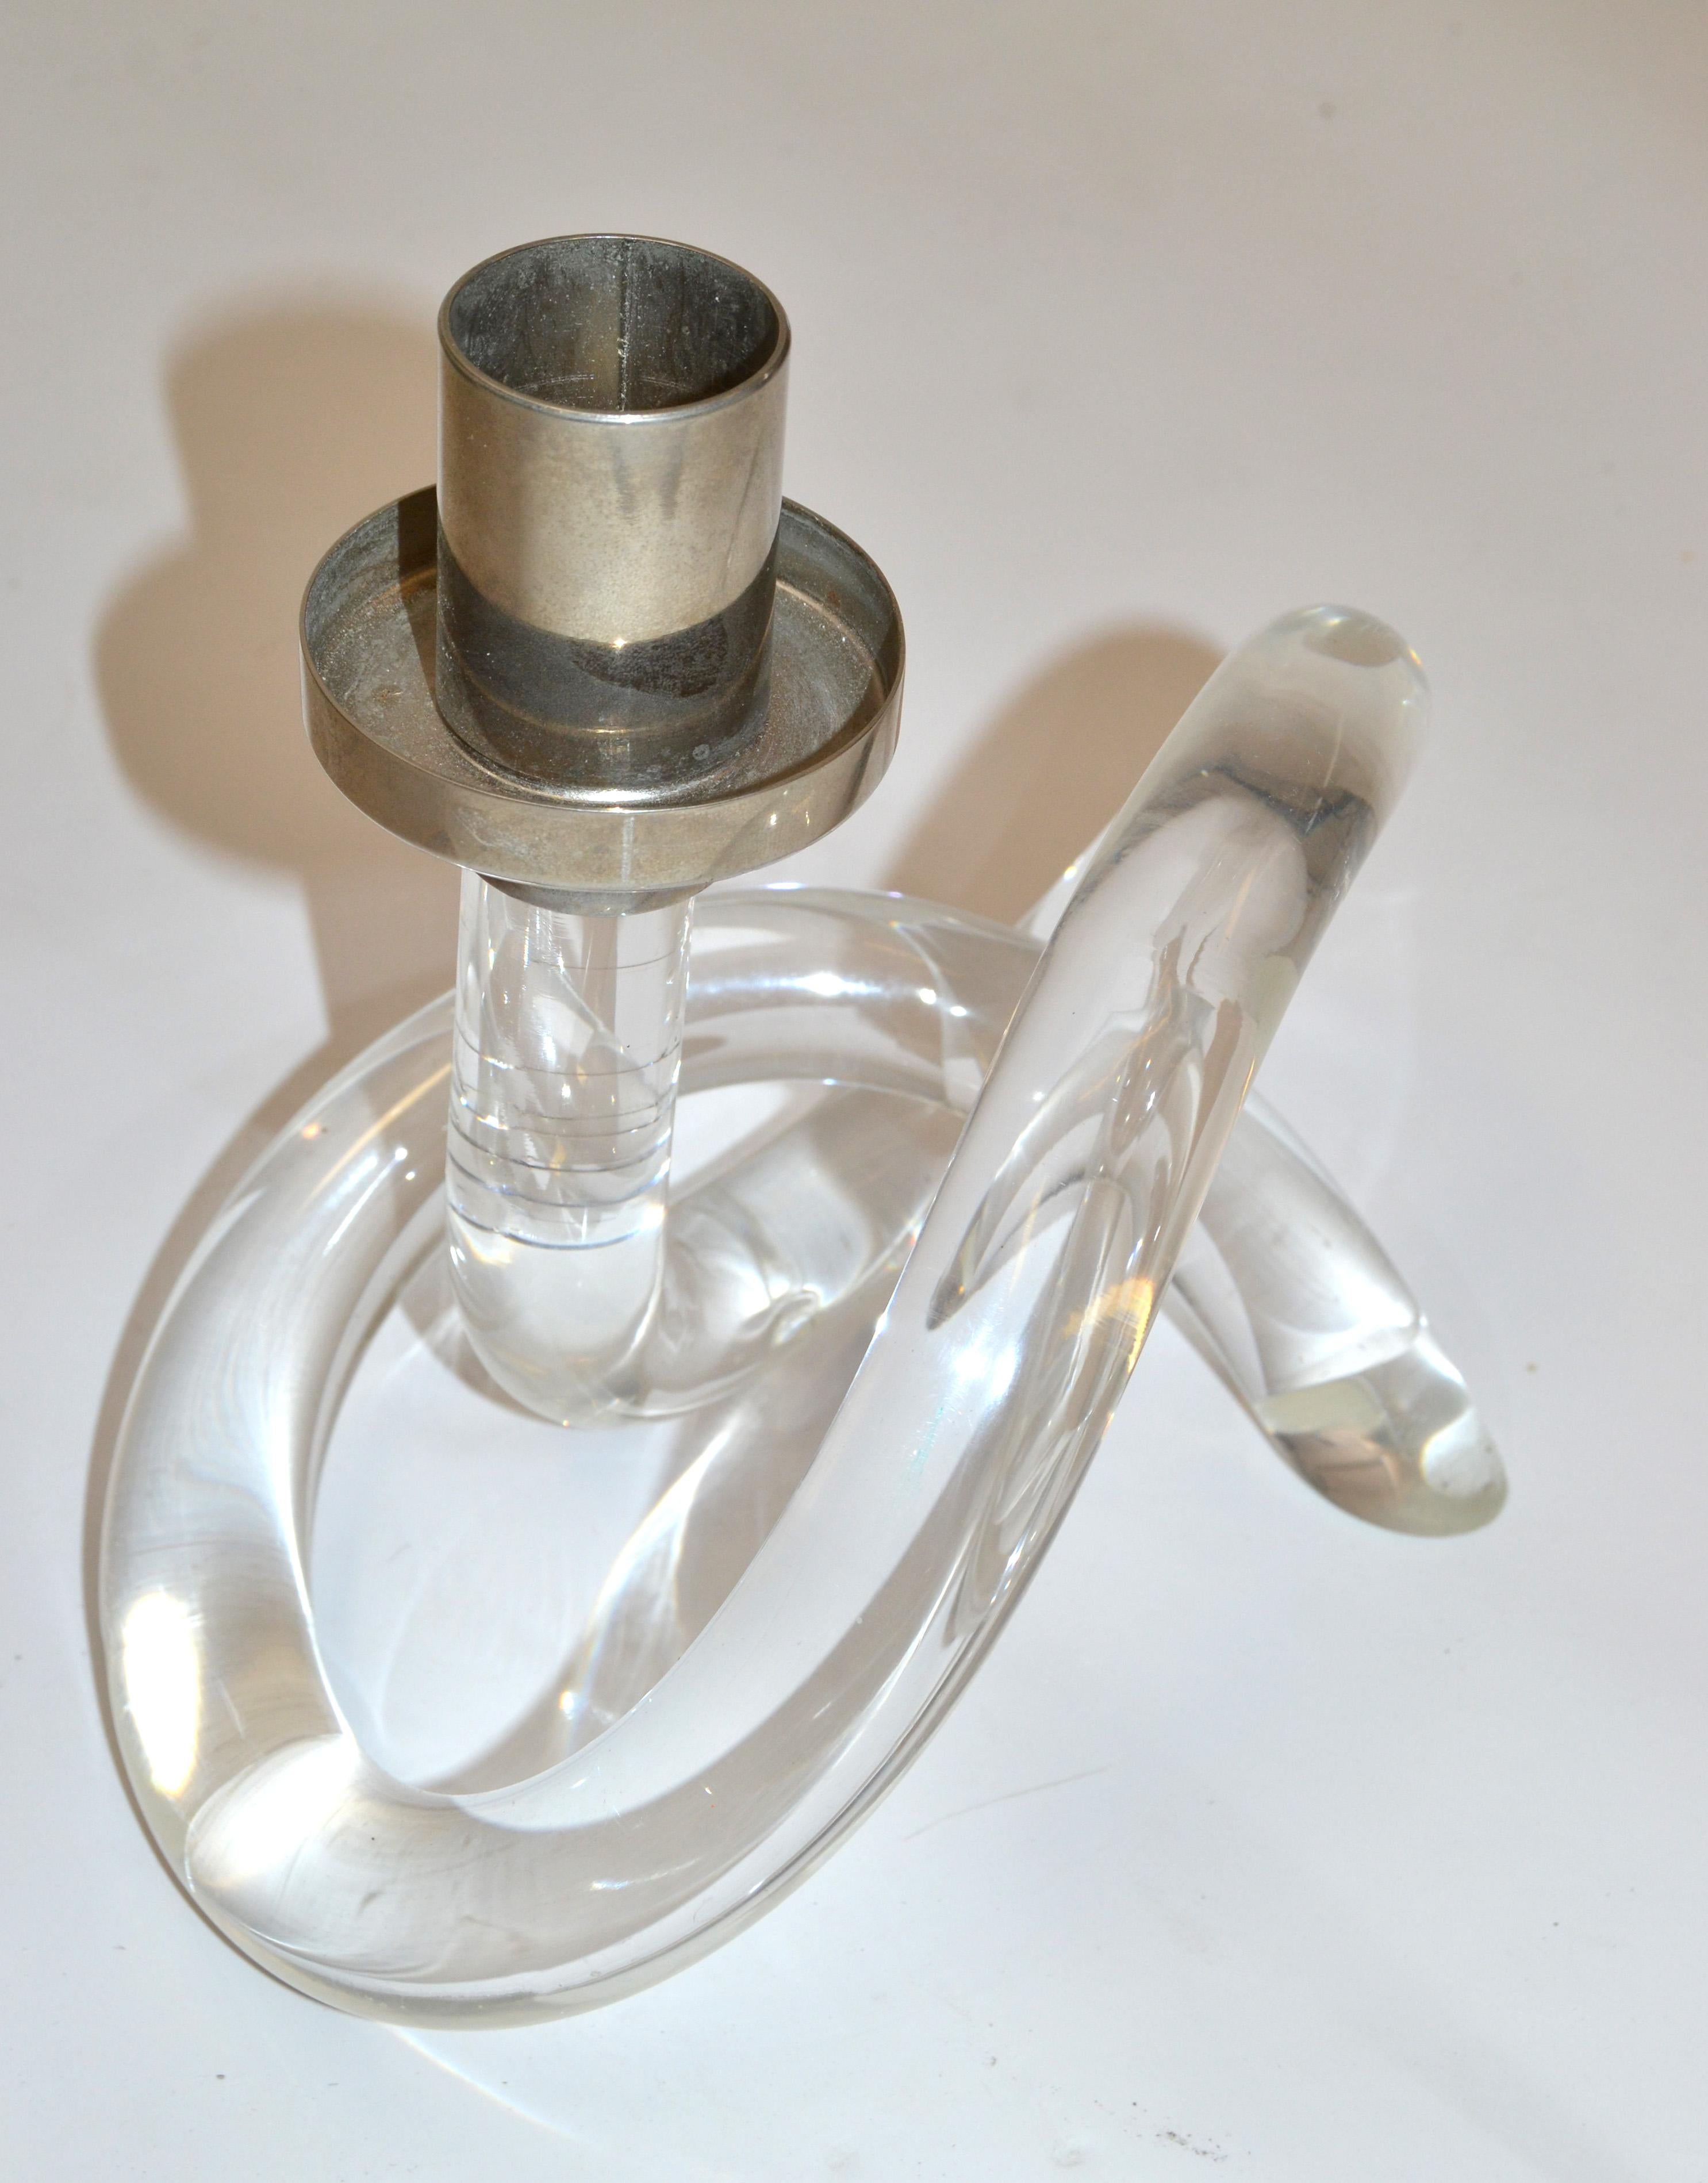 Hand-Crafted Dorothy Thorpe Lucite and Nickel Candleholder in Pretzel Shape